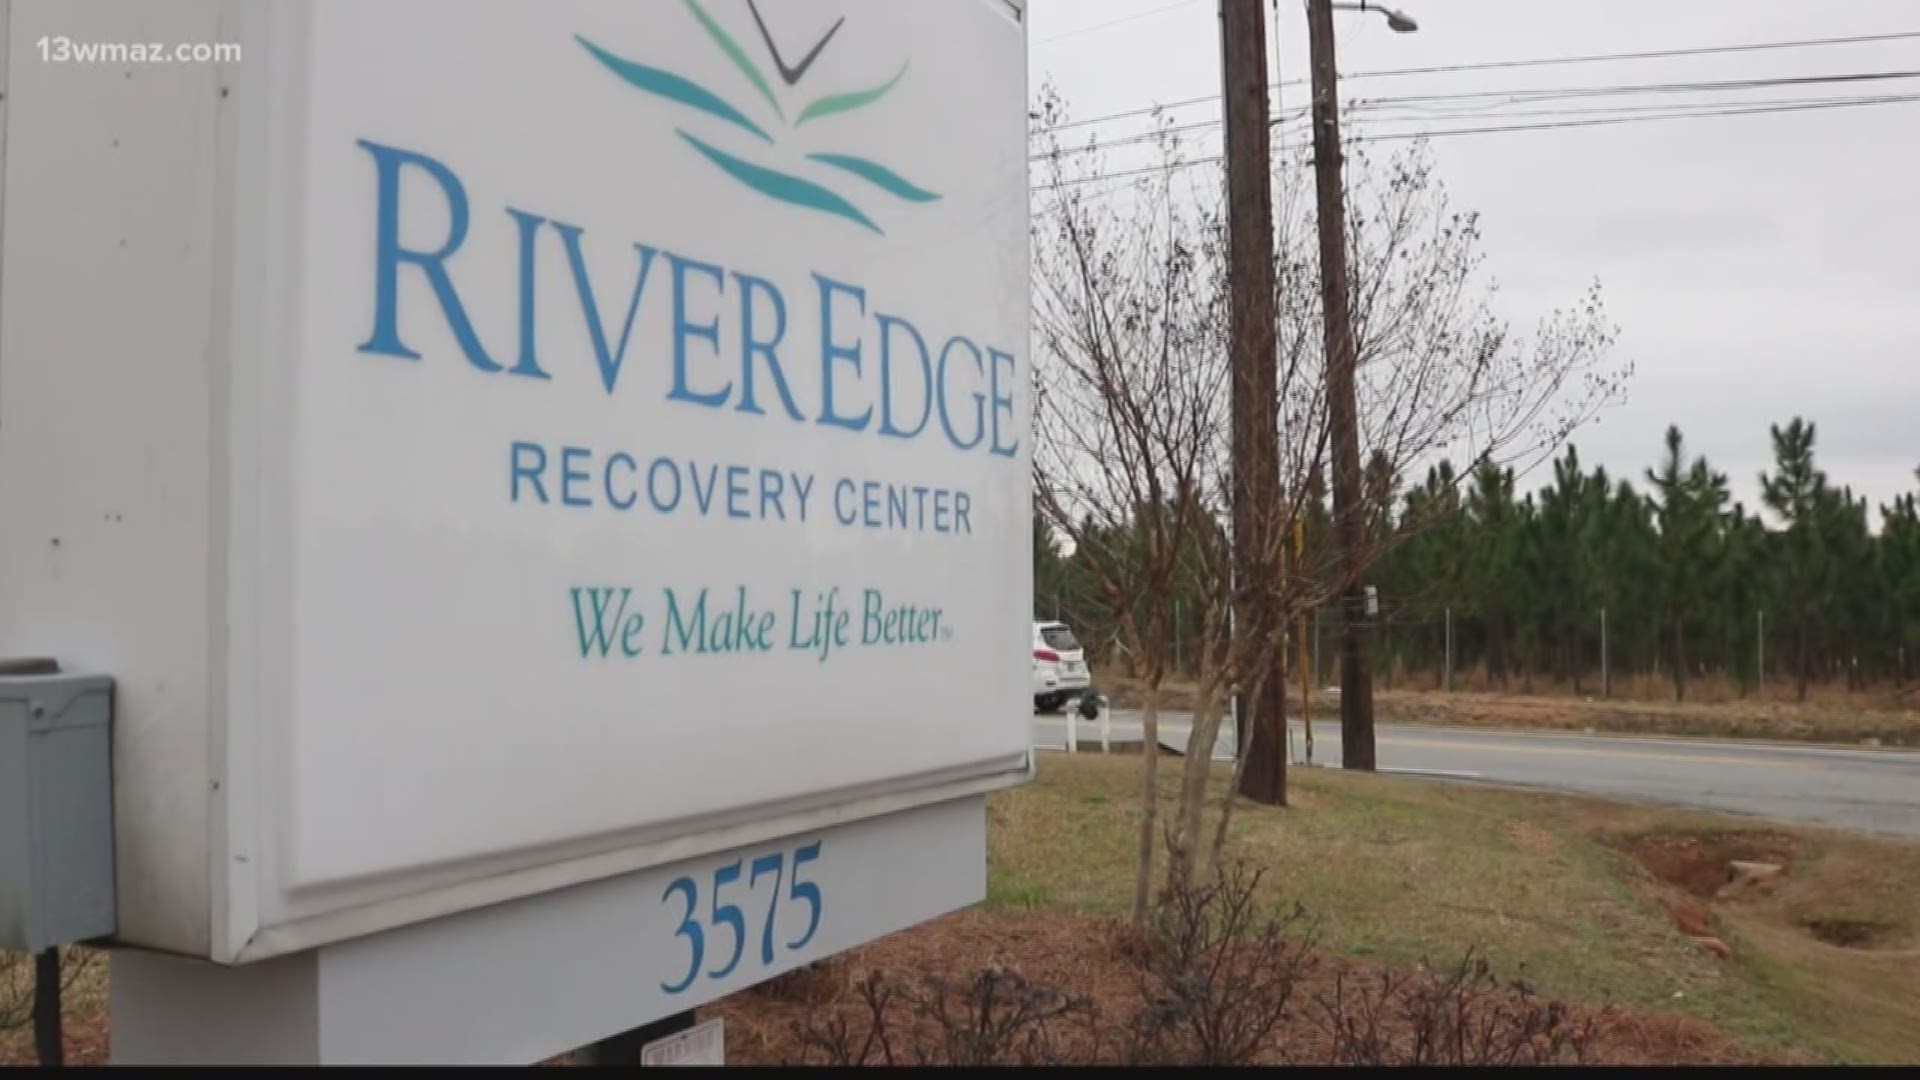 River Edge is consistently at capacity, so the facility is in a design phase for a planned expansion